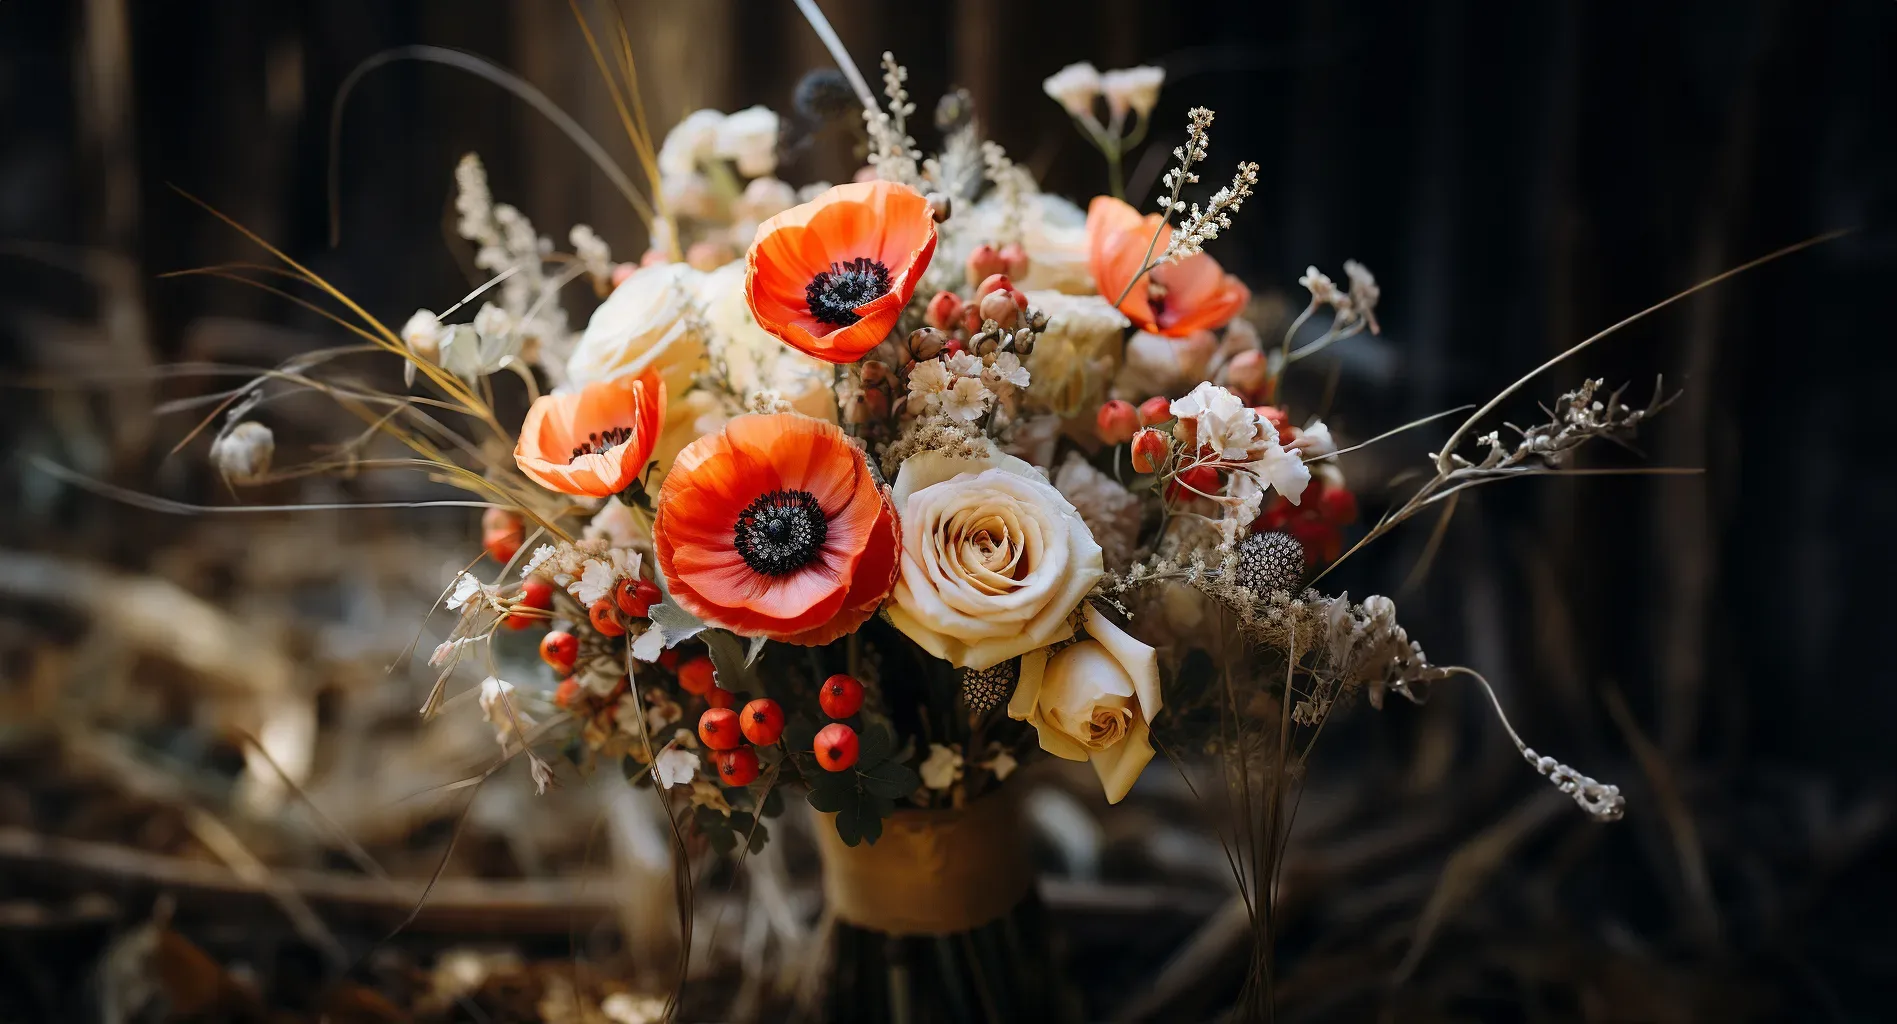 A bouquet of orange and white flowers on the ground.£2000.00 weddings. Flowers for your wedding. Unconventional; Weddings